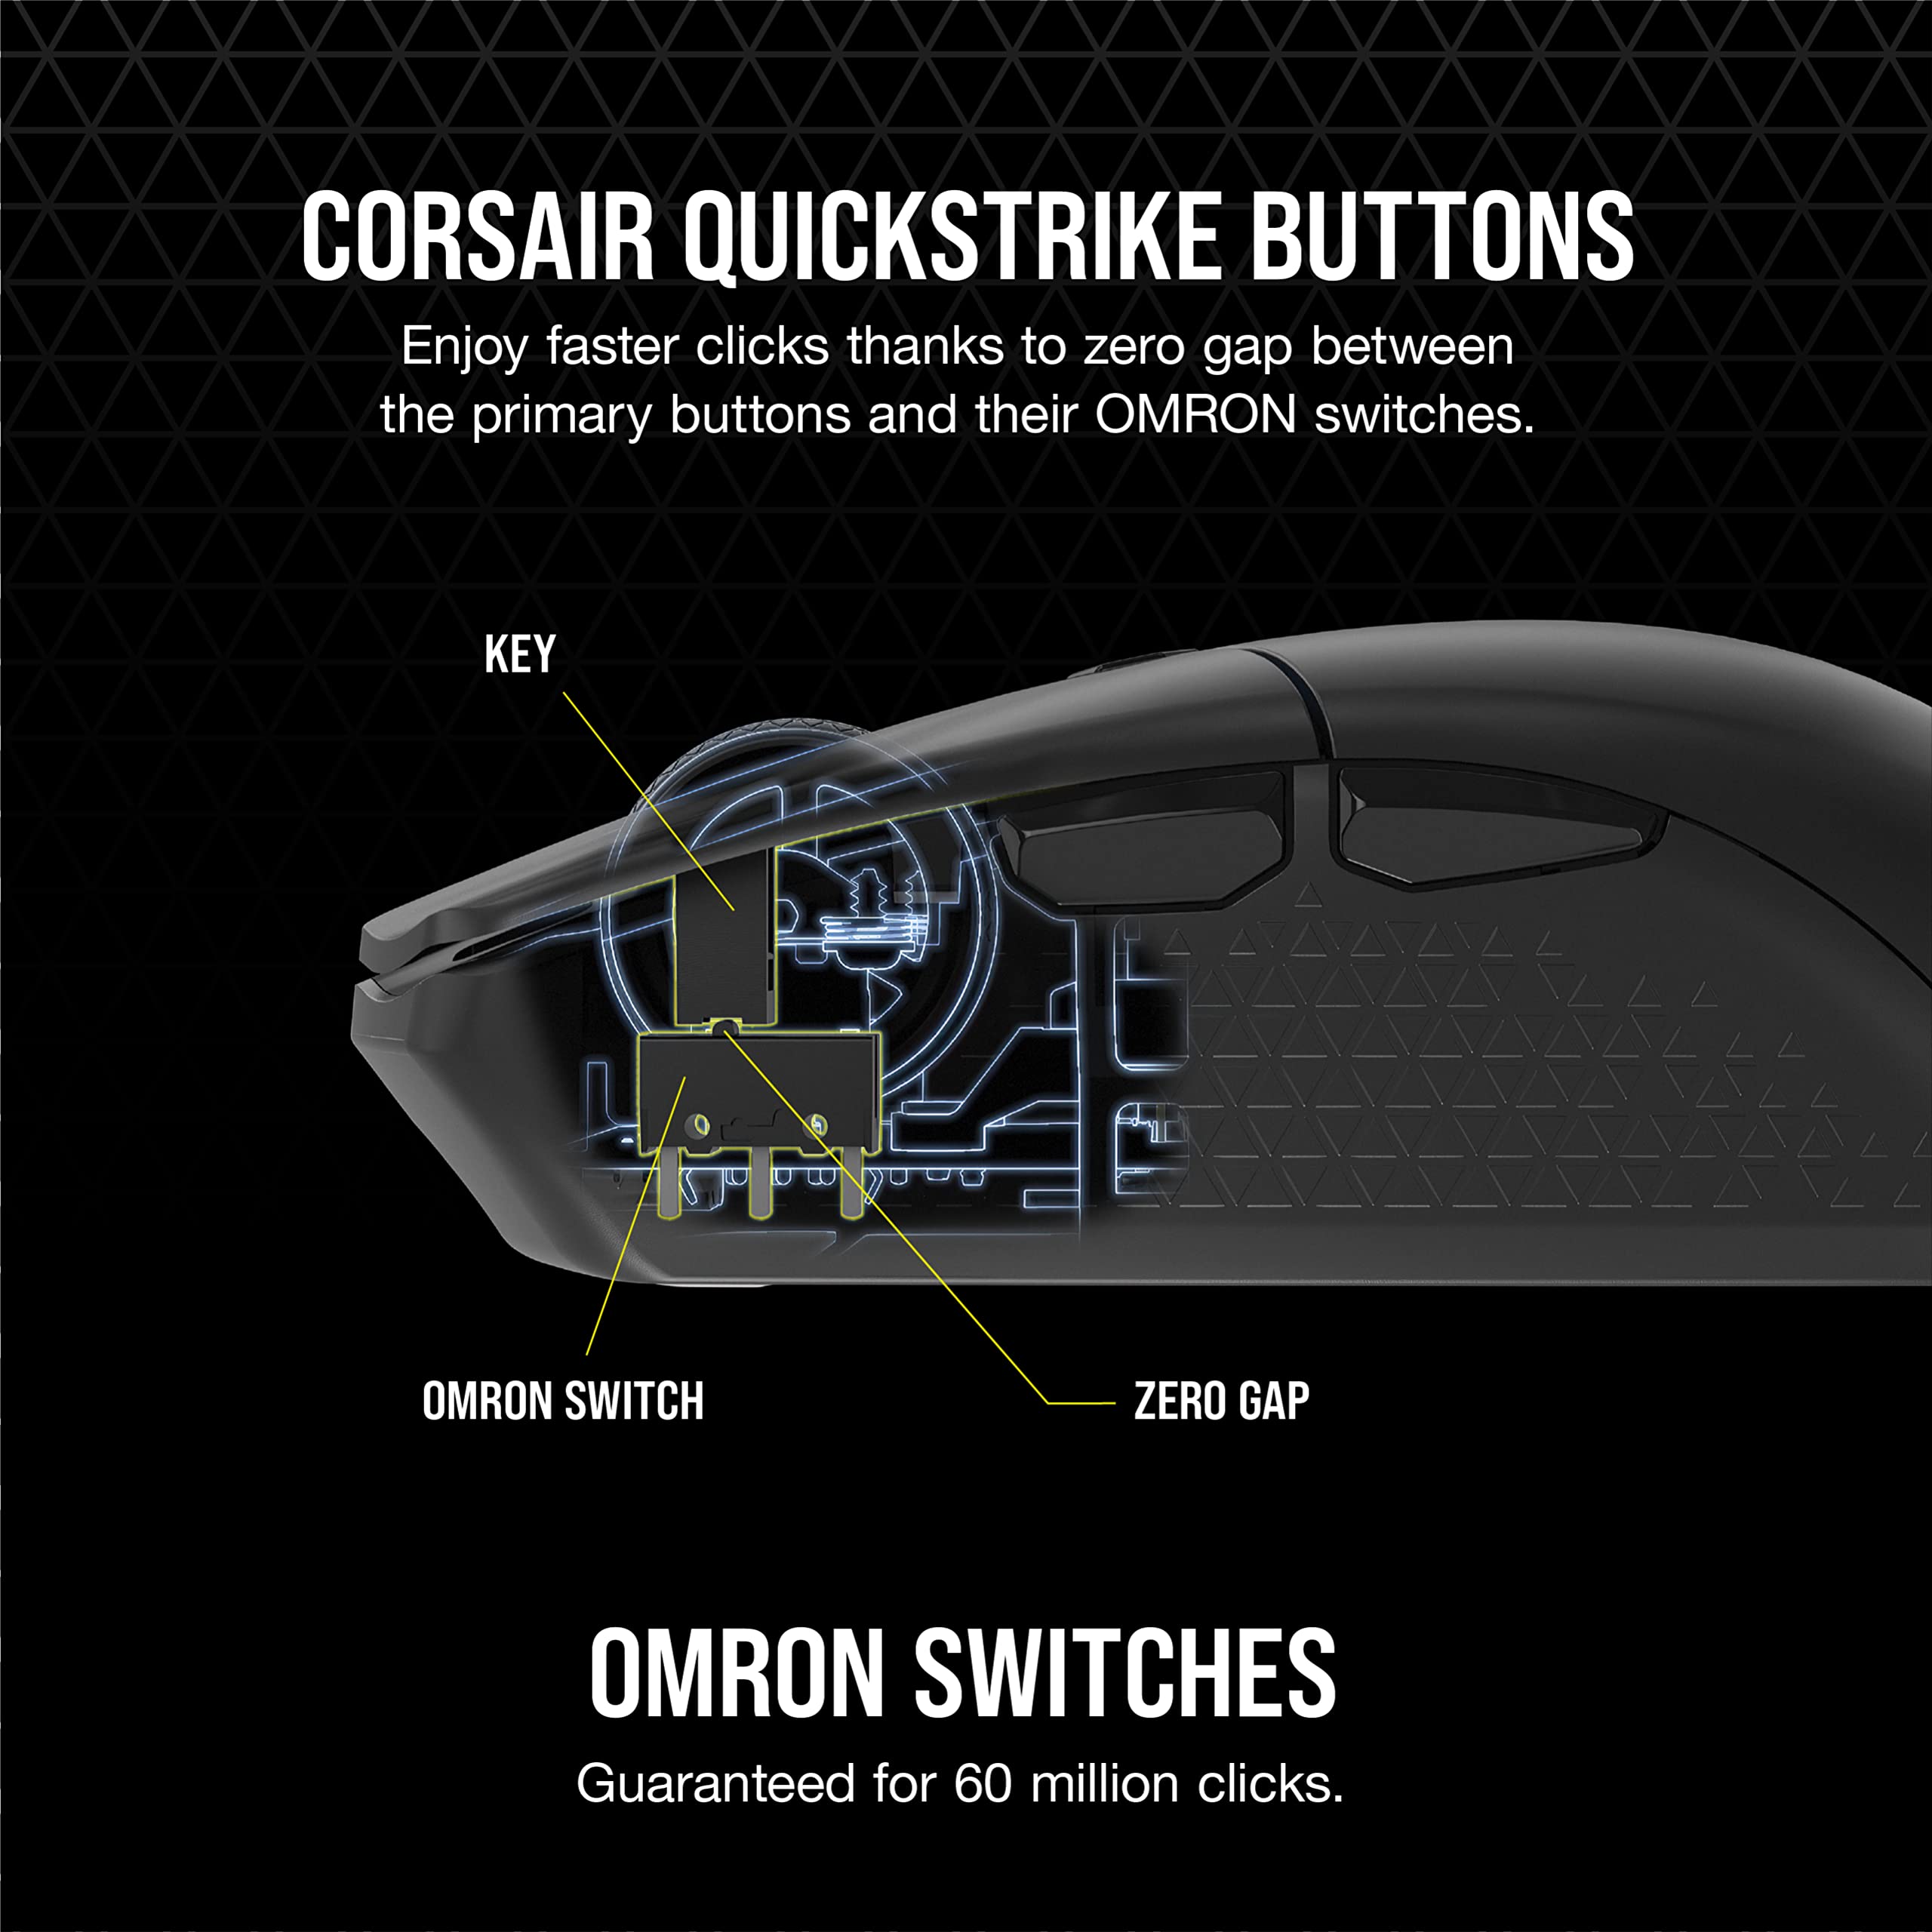 Corsair KATAR Elite Wireless Gaming Mouse - Ultra Lightweight, Marksman 26,000 DPI Optical Sensor, Sub-1ms Slipstream Wireless Connection, Up to 110 Hours of Rechargeable Battery Life - Black